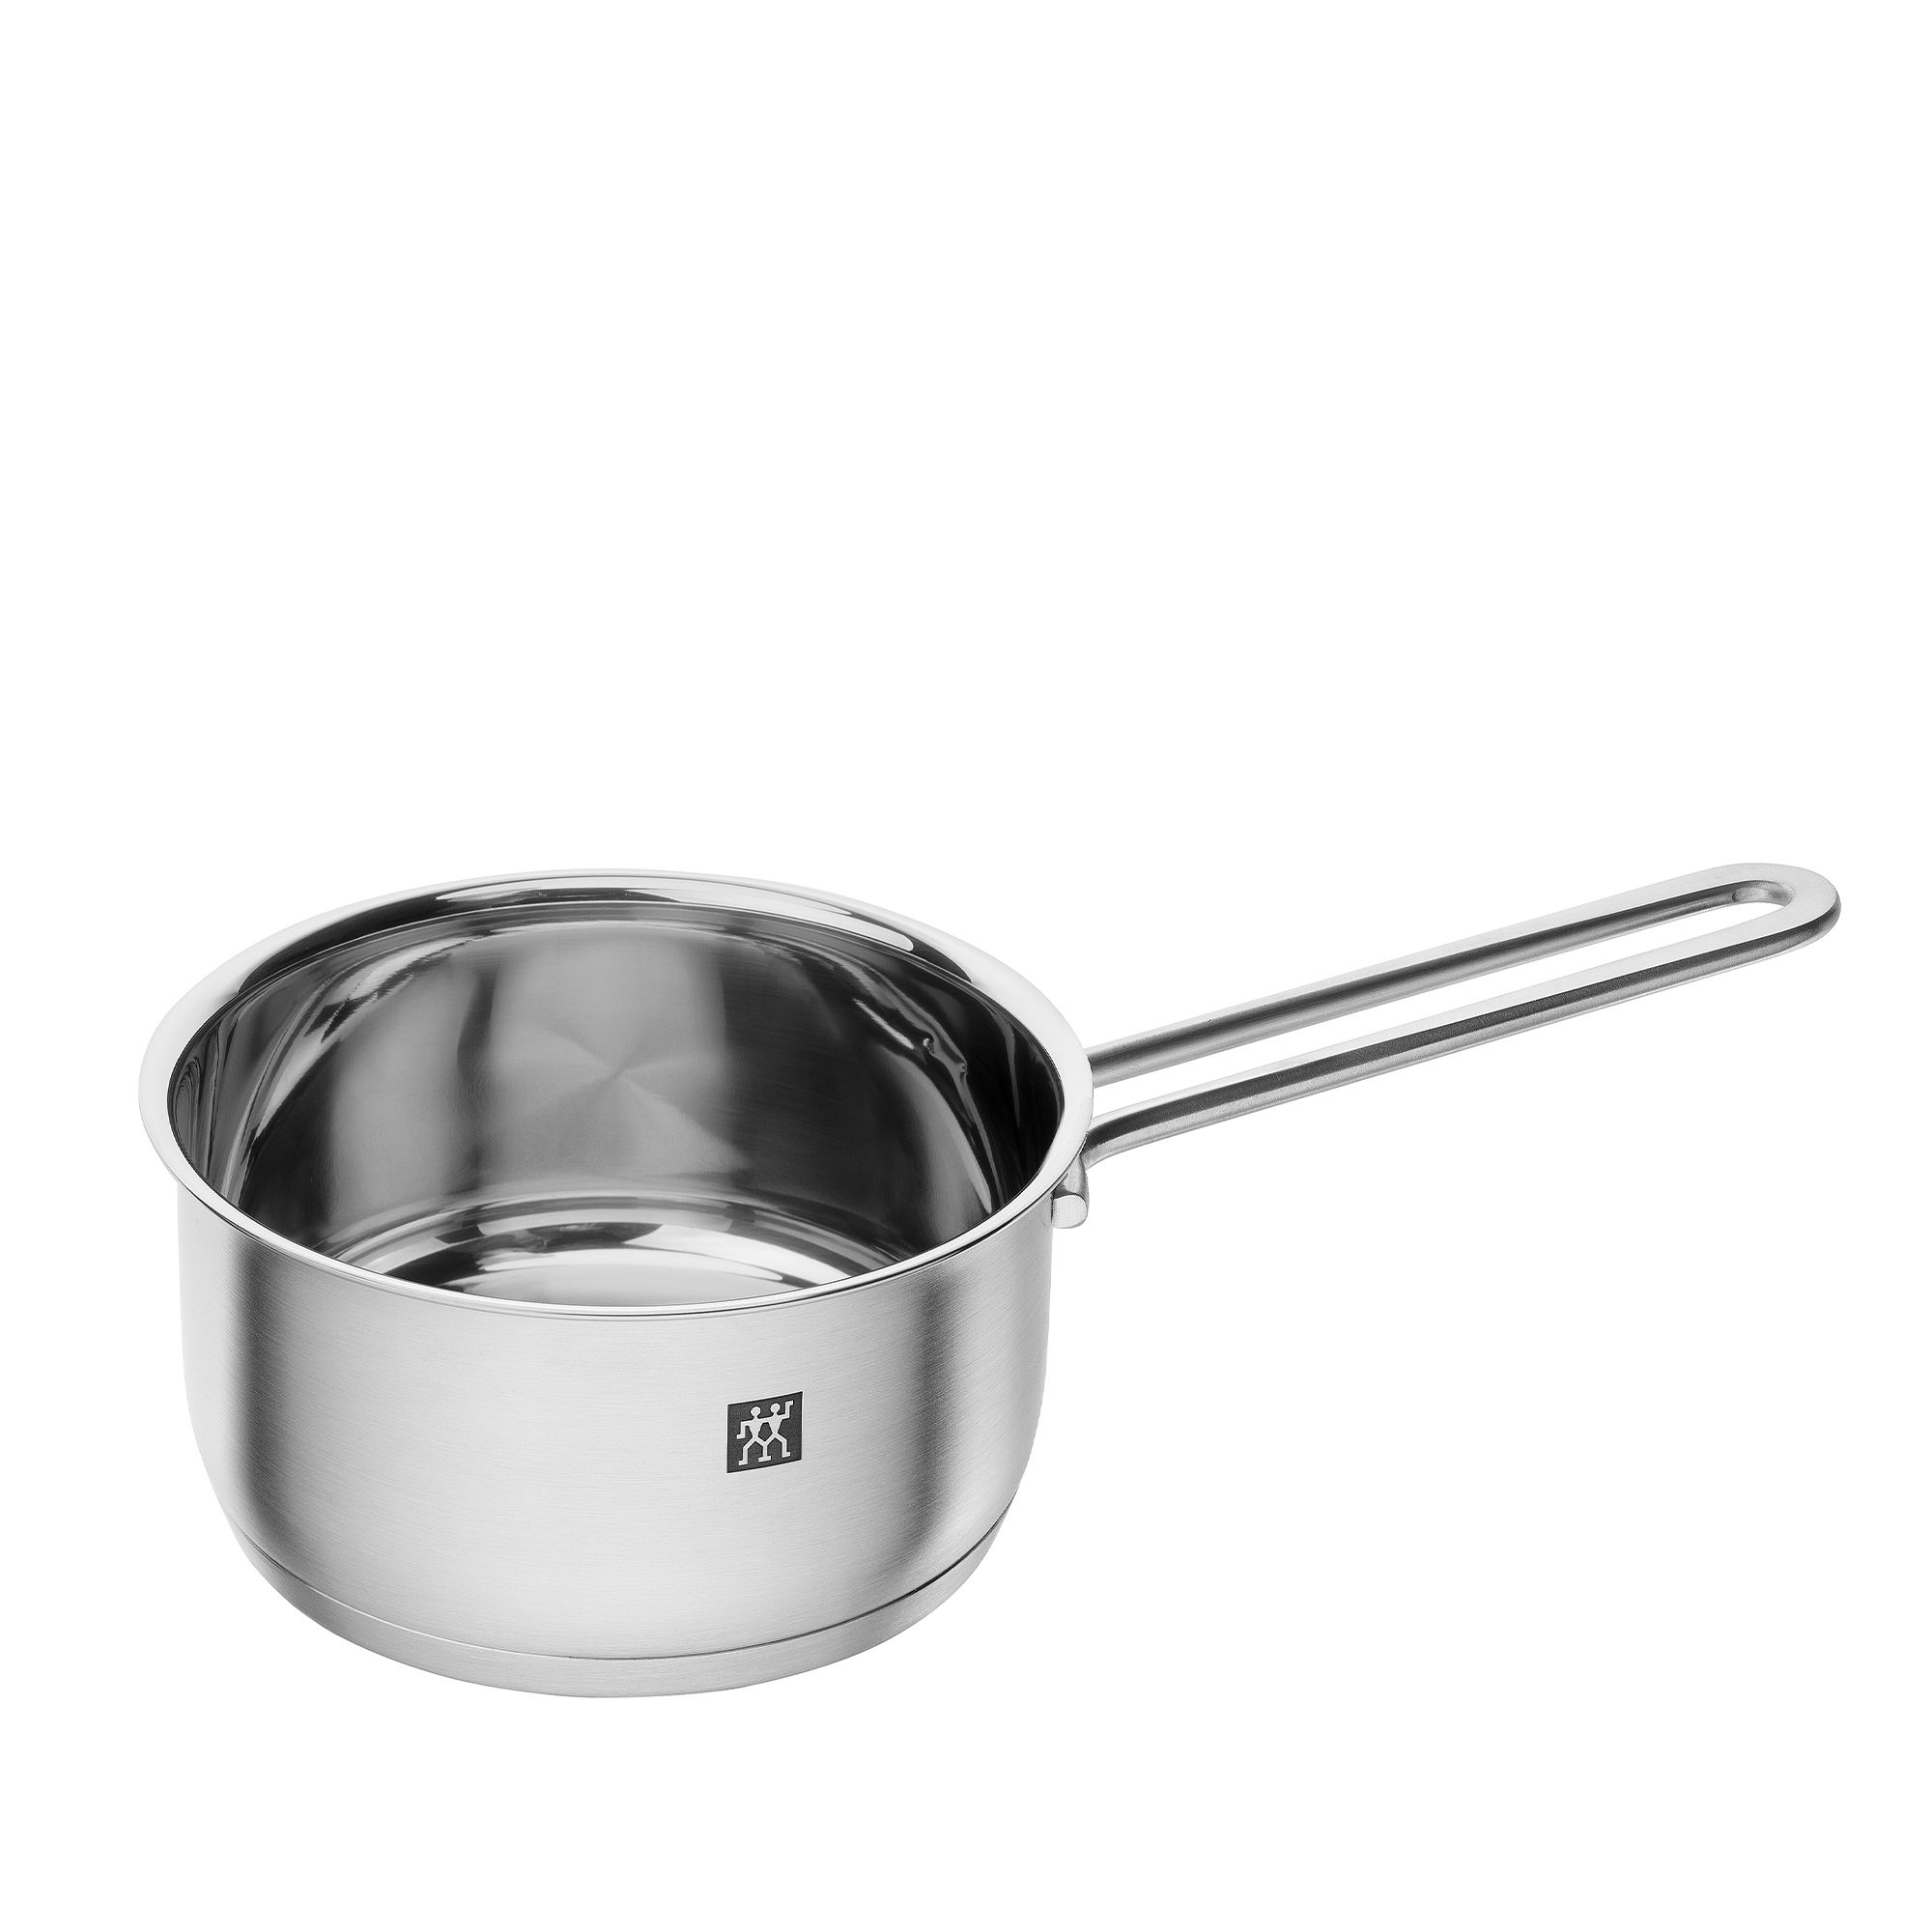 Zwilling - pico - saucepan - 14 cm - uncoated